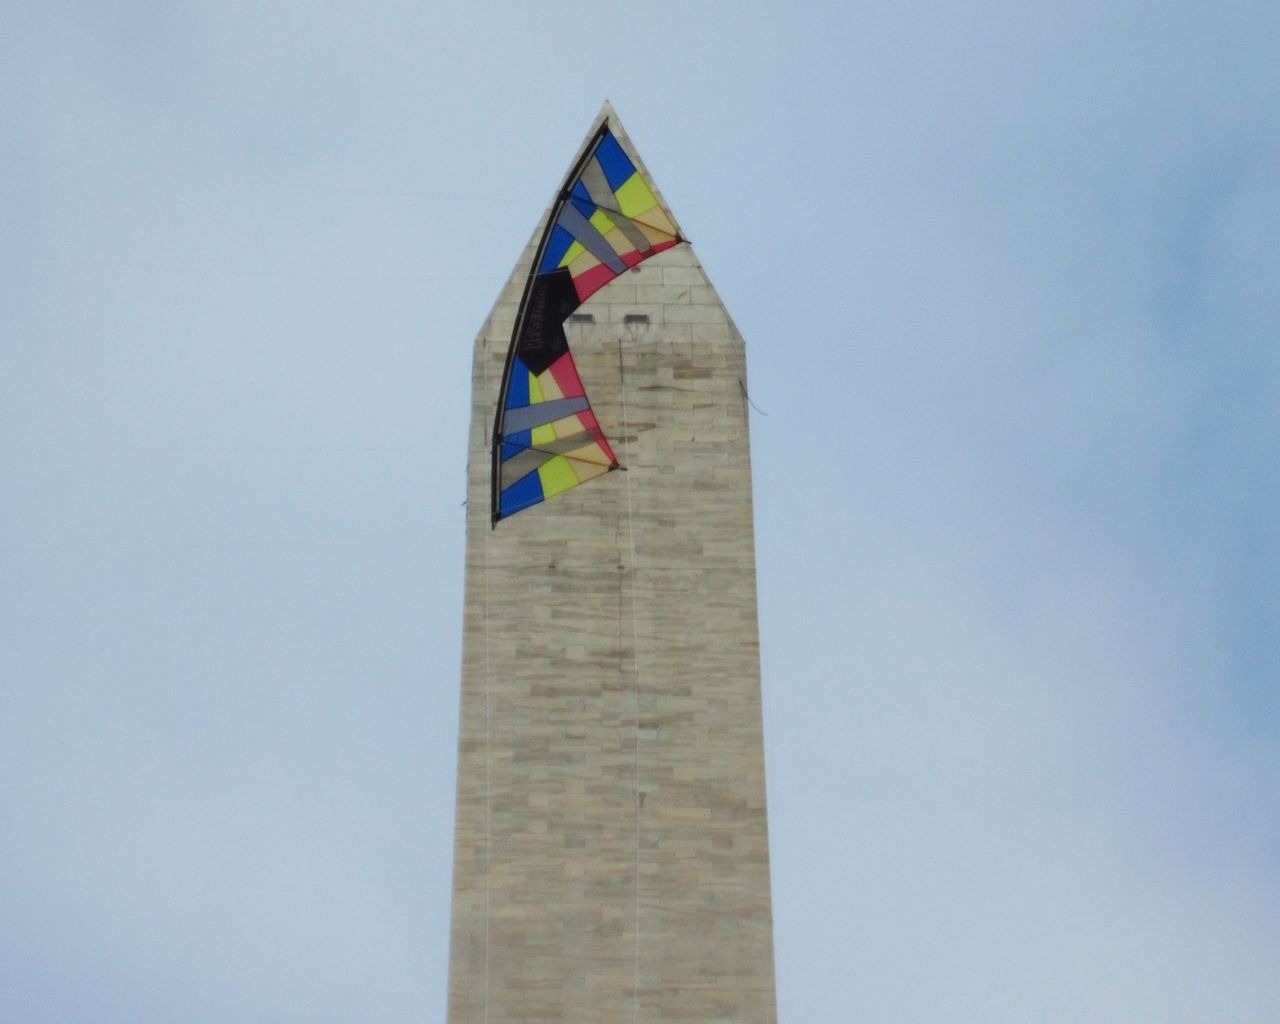 A kite flying over a monument